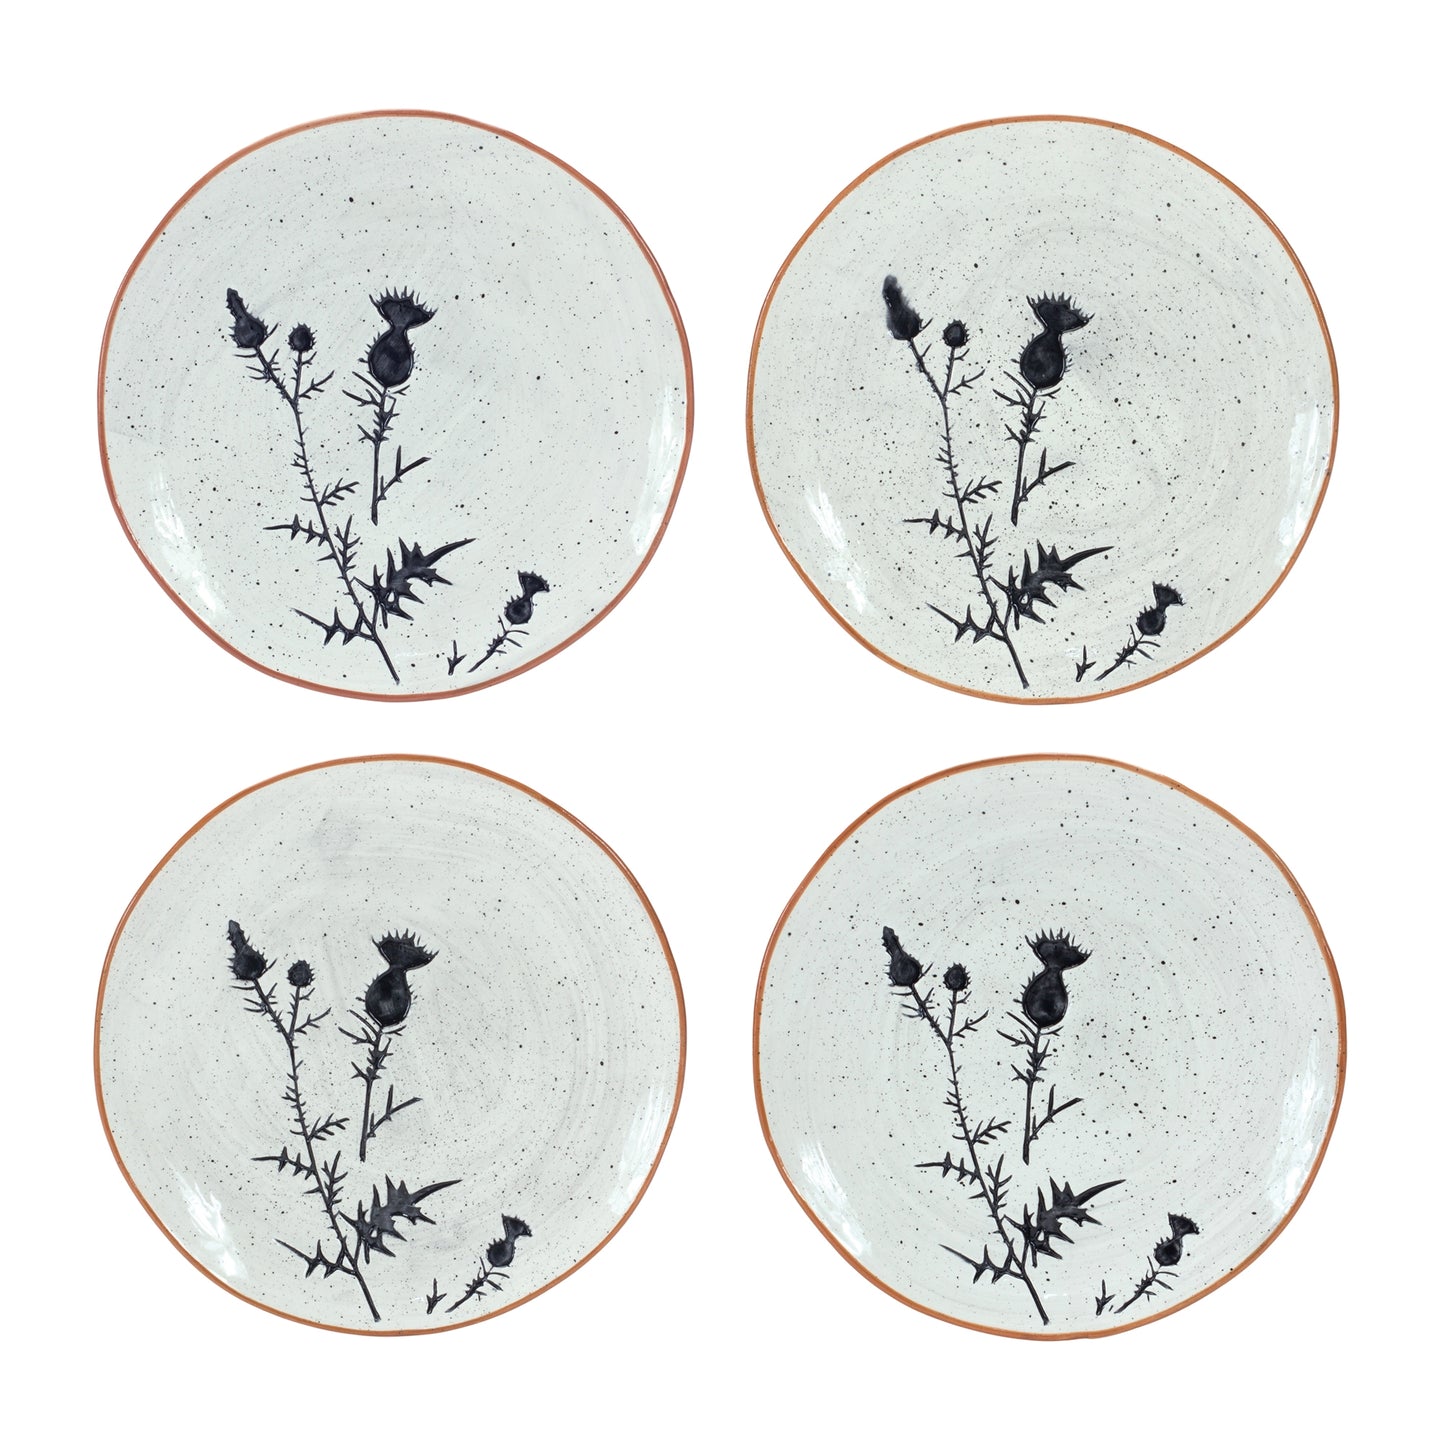 Rustic Thistle Etched Plate with Speckled Finish (Set of 2)